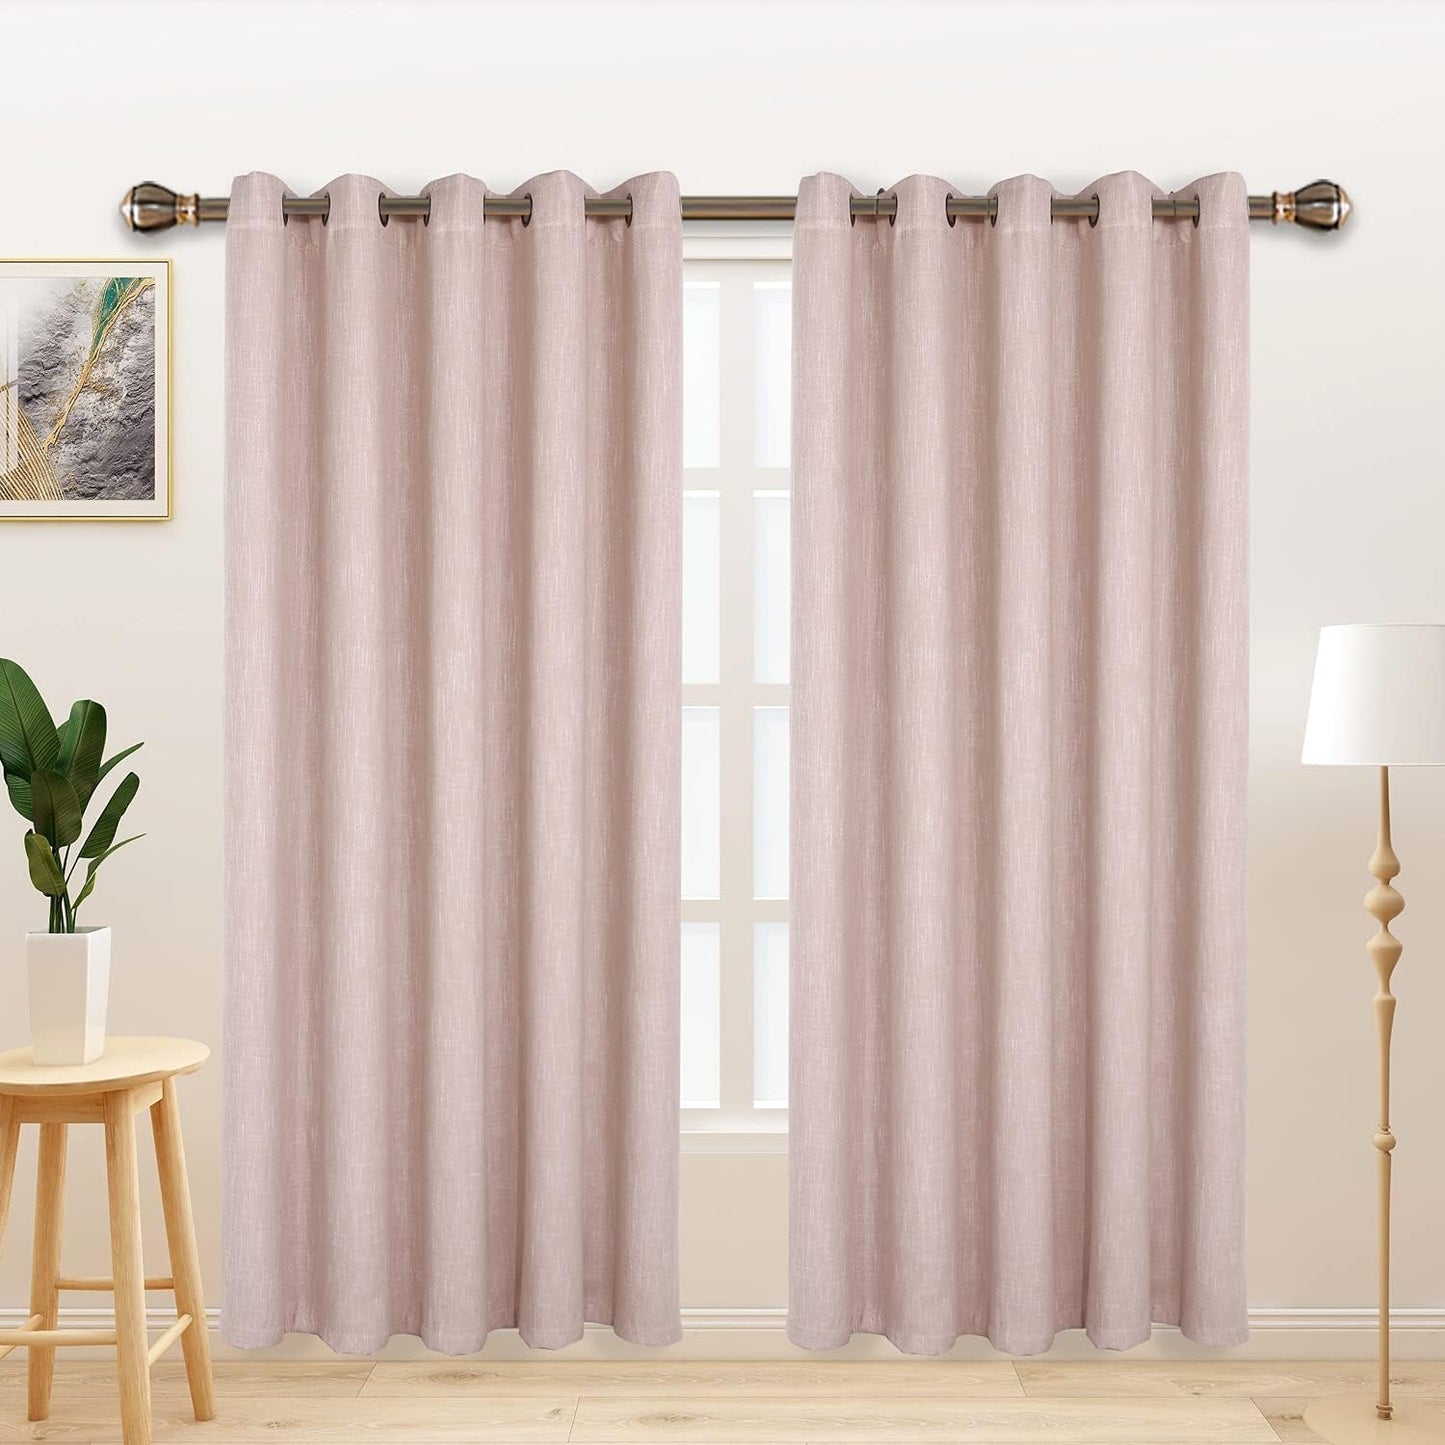 LORDTEX Linen Look Textured Blackout Curtains with Thermal Insulated Liner - Heavy Thick Grommet Window Drapes for Bedroom, 50 X 84 Inches, Ivory, Set of 2 Panels  LORDTEX Blush 70 X 84 Inches 